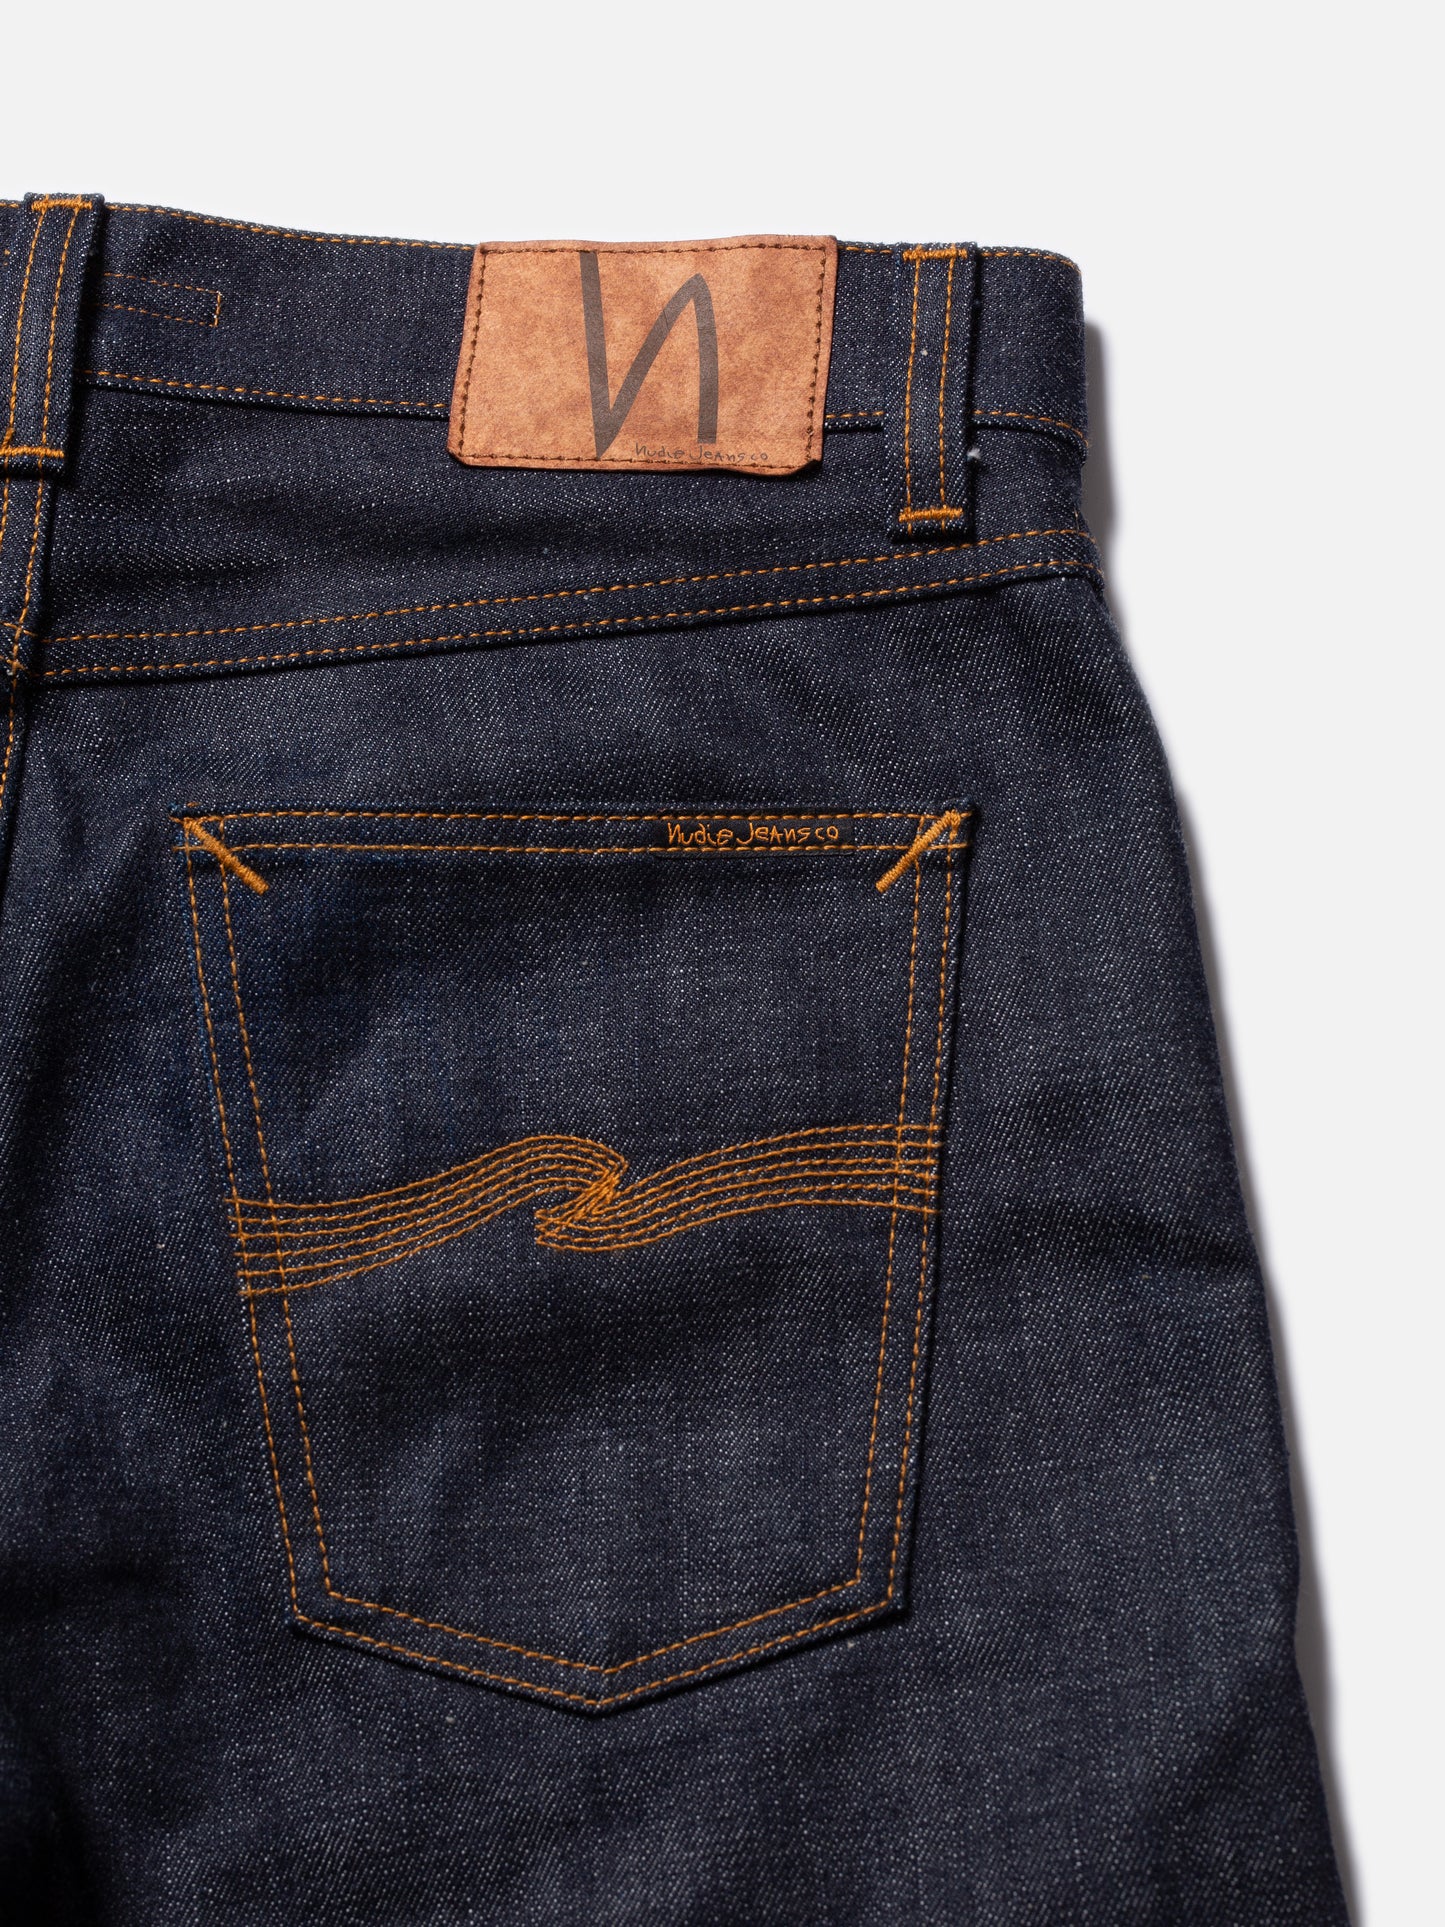 Nudie Jeans Gritty Jackson Jean L32 Dry Ruby Selvage